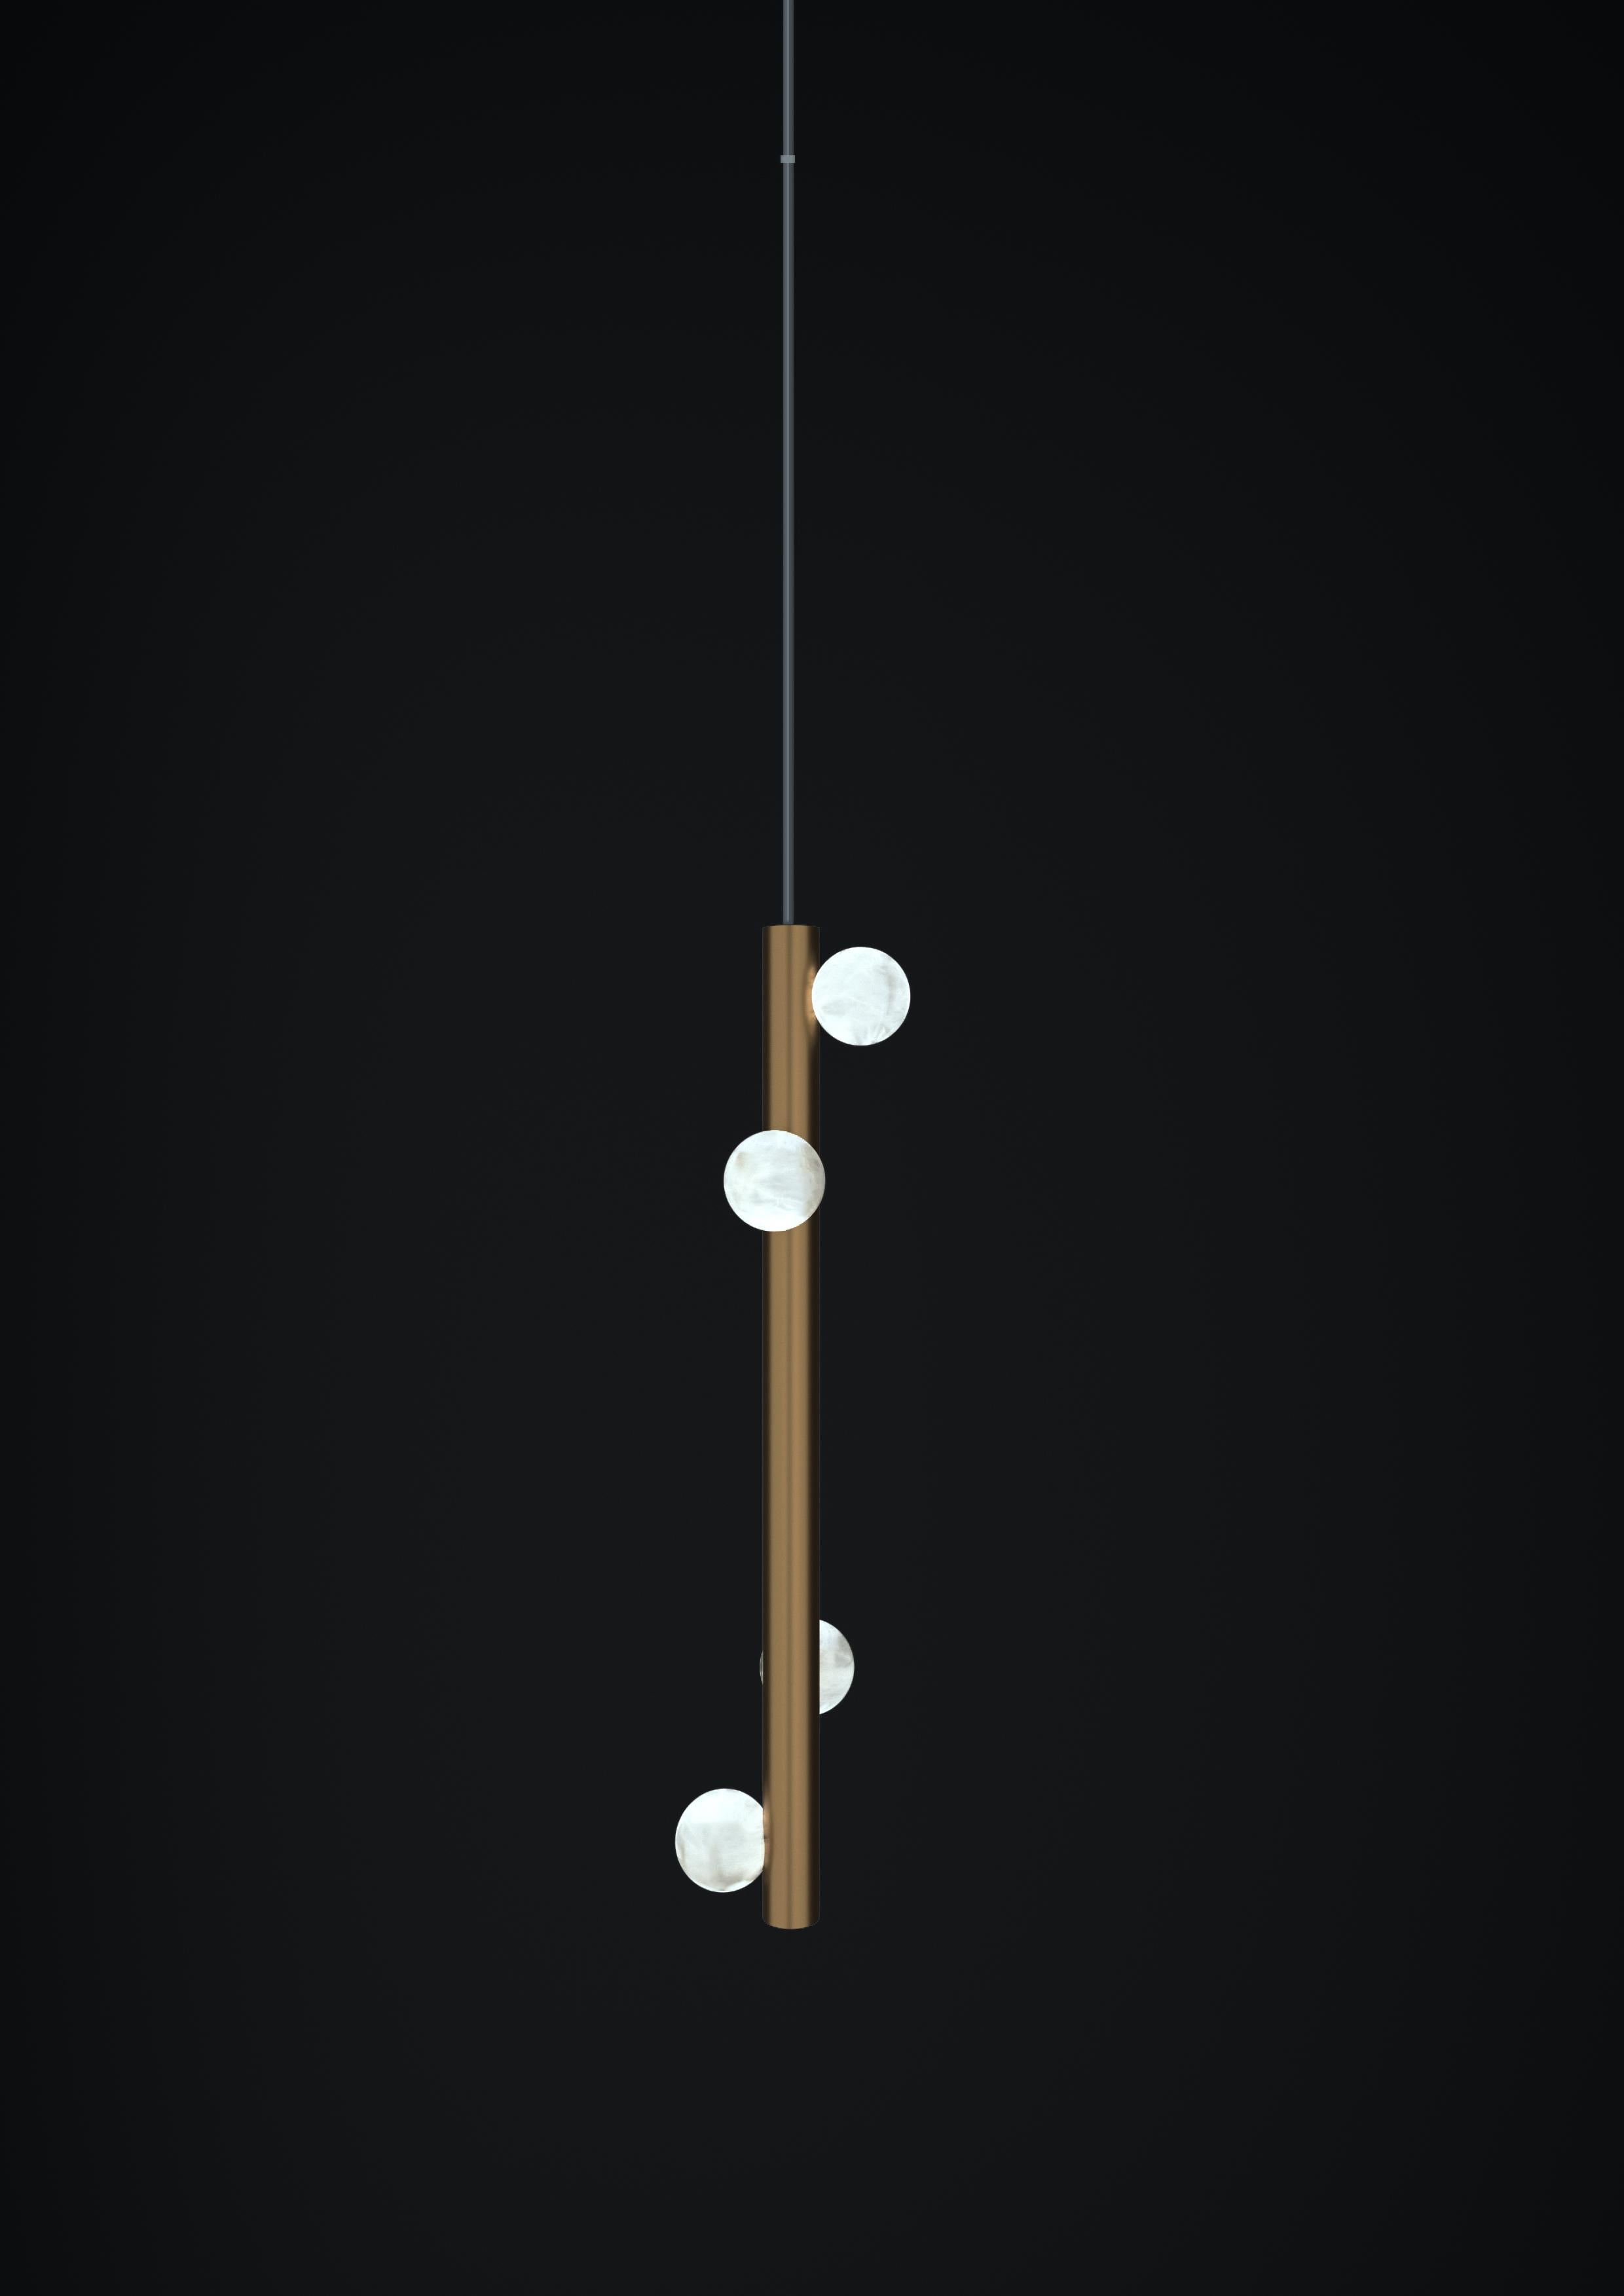 Demetra Bronze Pendant Lamp 2 by Alabastro Italiano
Dimensions: D 12 x W 12 x H 60 cm.
Materials: White alabaster and bronze.

Available in different finishes: Shiny Silver, Bronze, Brushed Brass, Ruggine of Florence, Brushed Burnished, Shiny Gold,